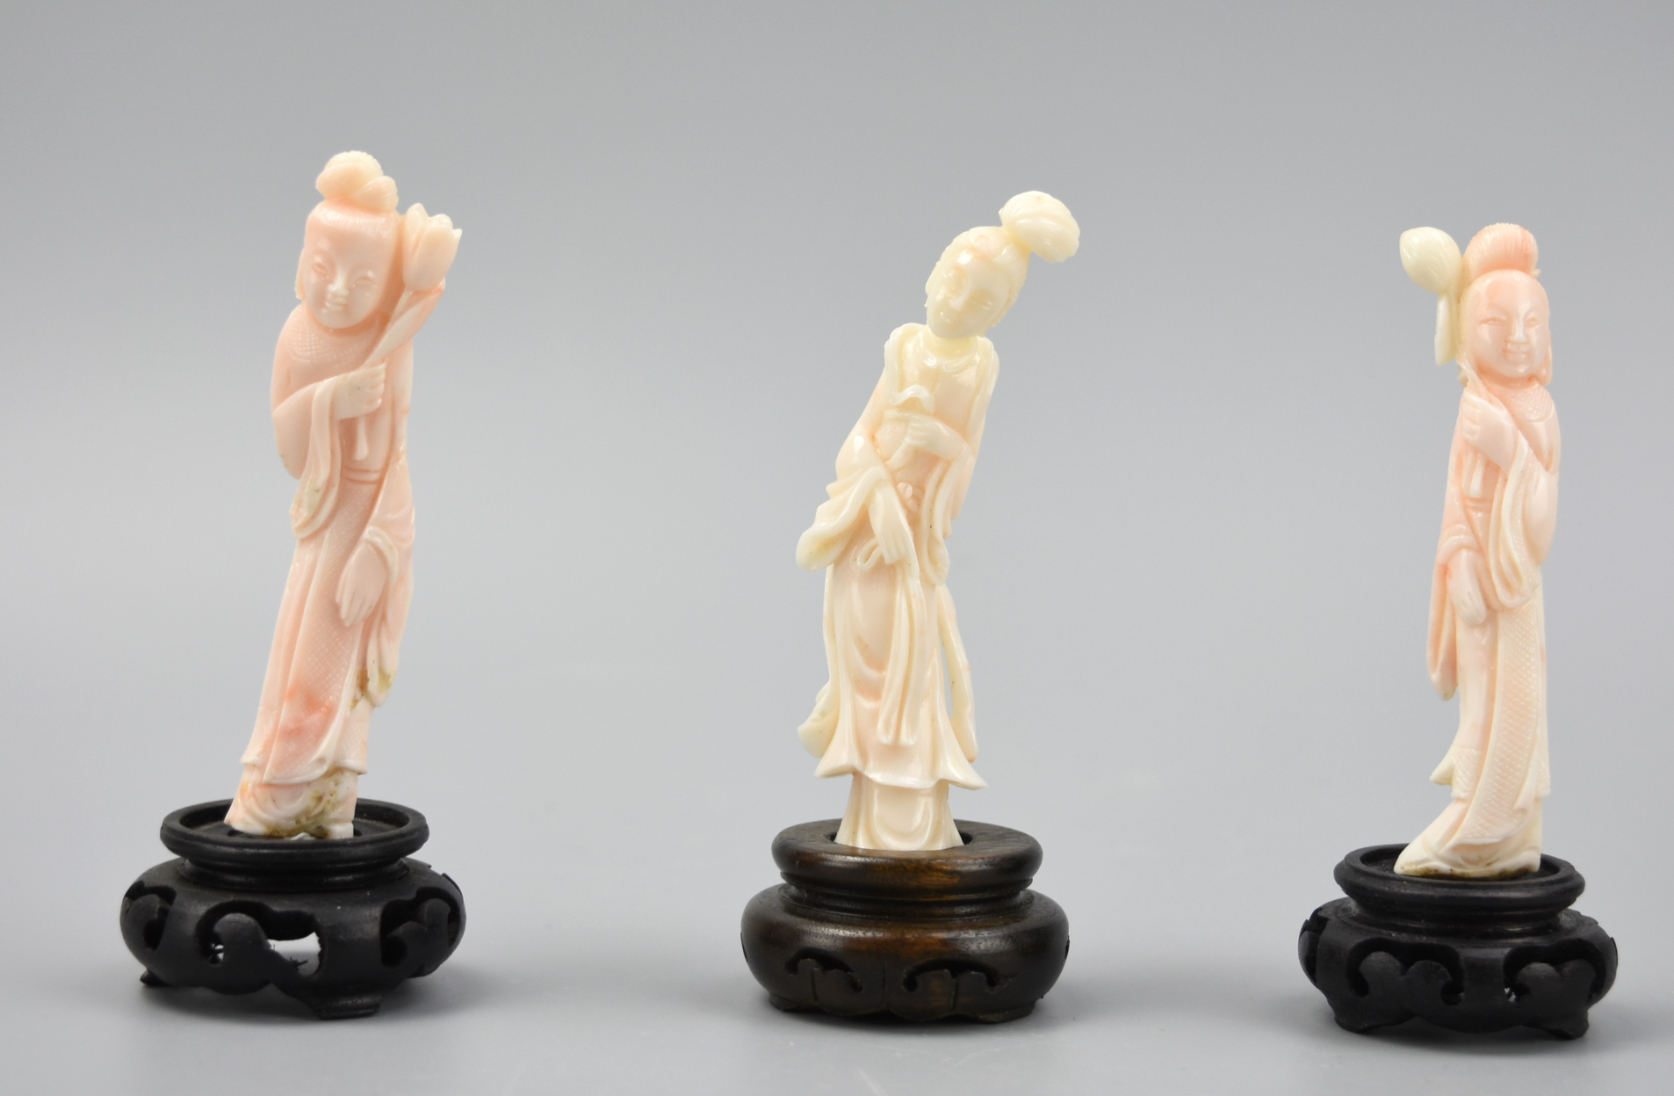  3 CHINESE CARVED CORAL LADY FIGURES 2cf831